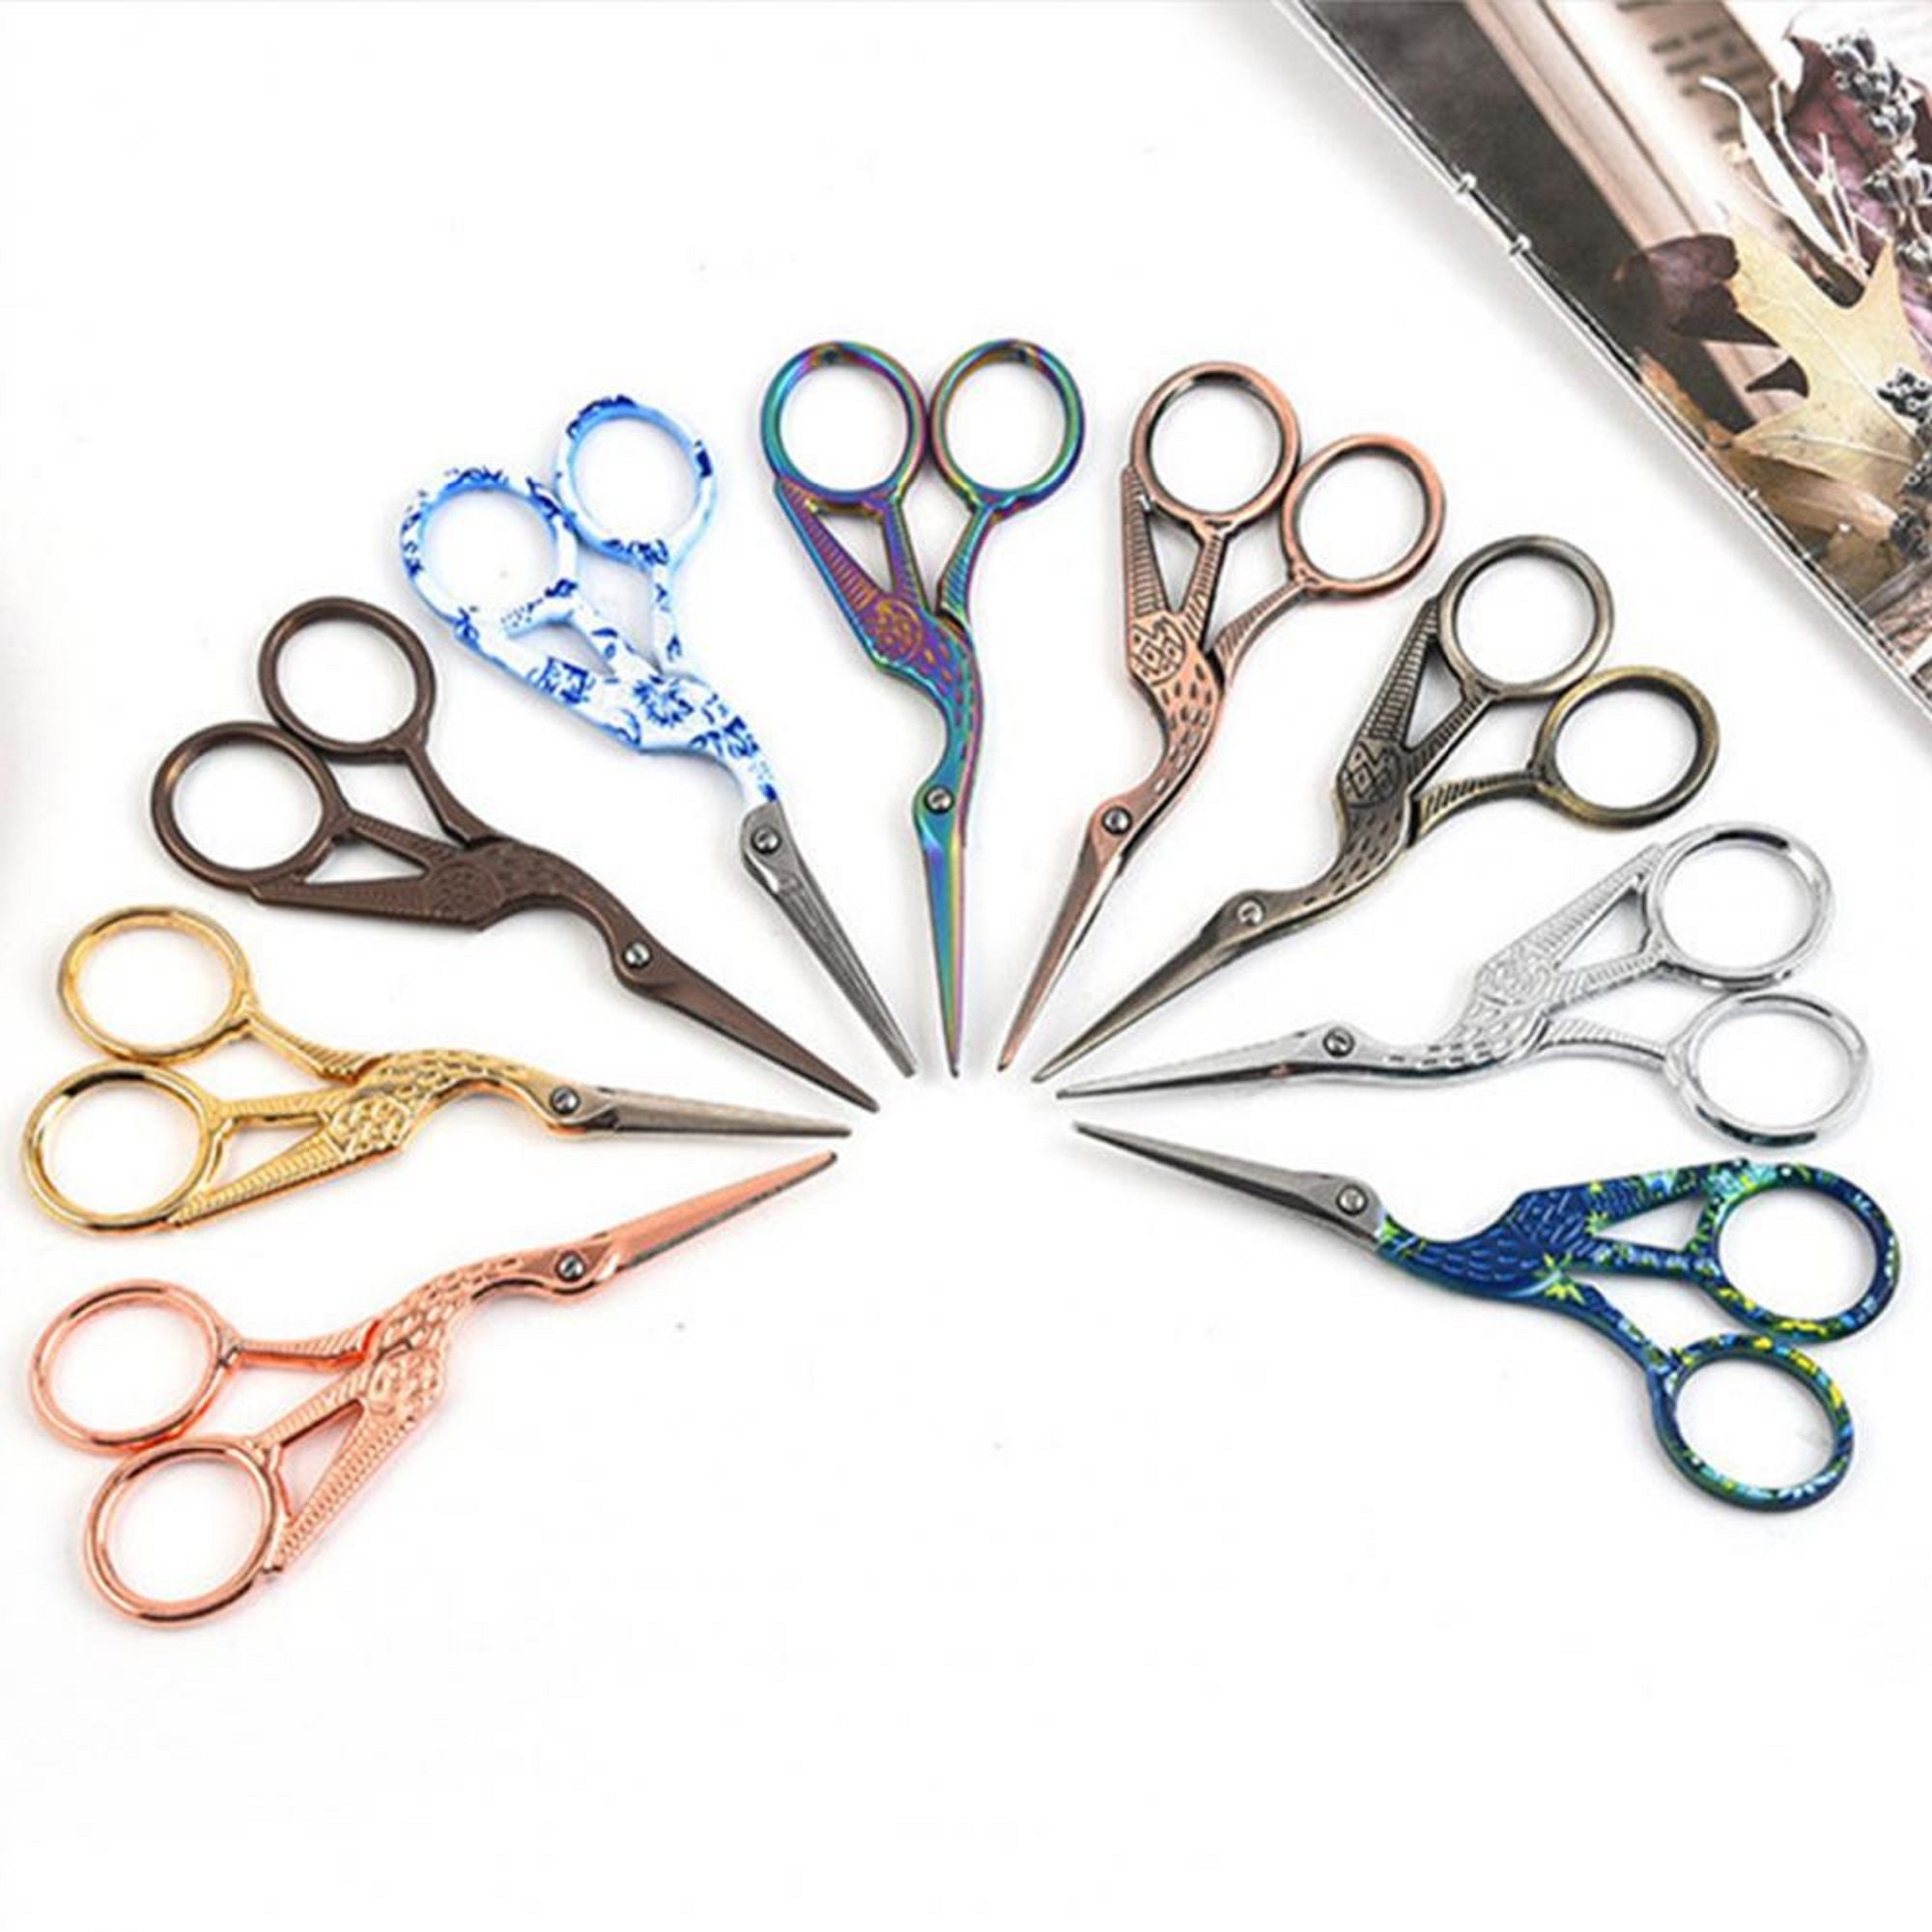 Sewing Scissors For Fabric Profession Stainless Steel Thread Scissors  Embroidery Scissors Yarn Shears Tools For Sewing Shears - AliExpress